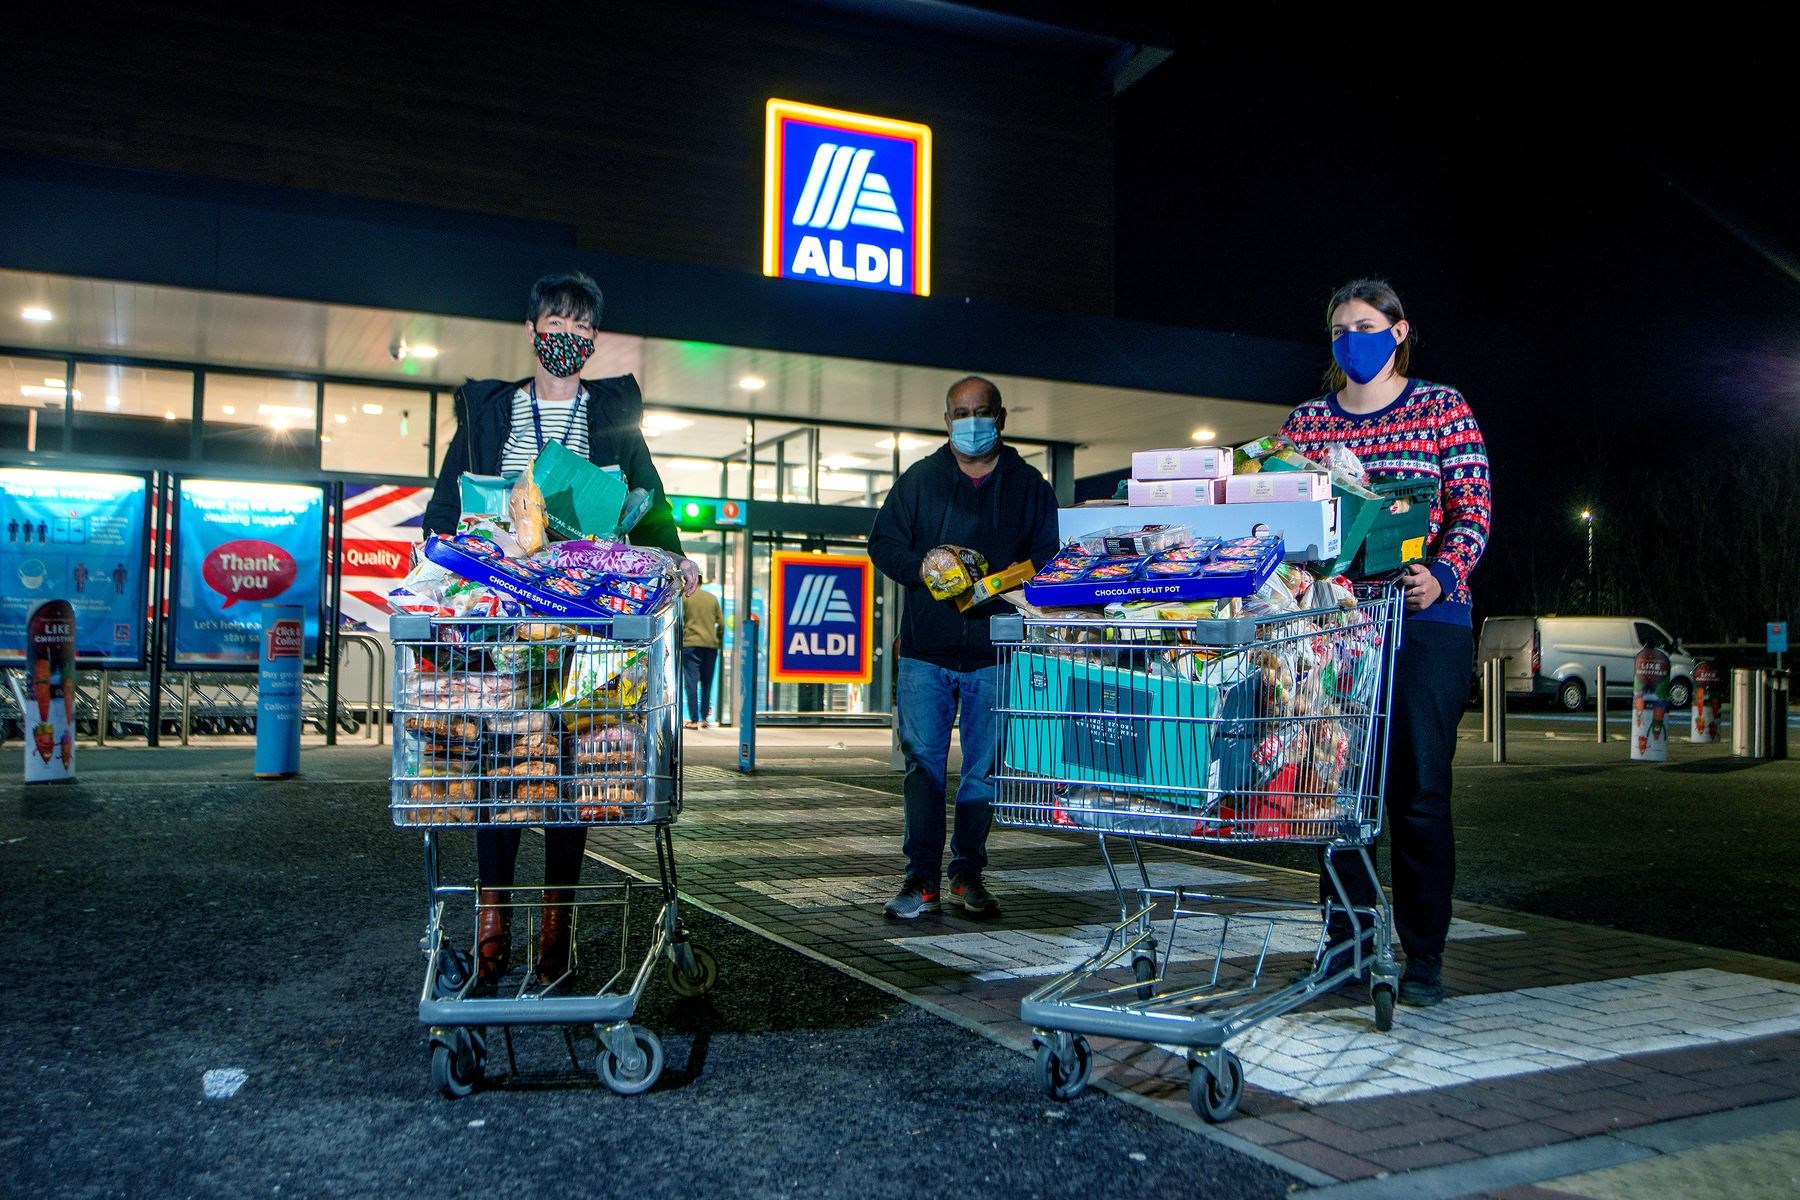 Aldi supported charities all over the country at Christmas.